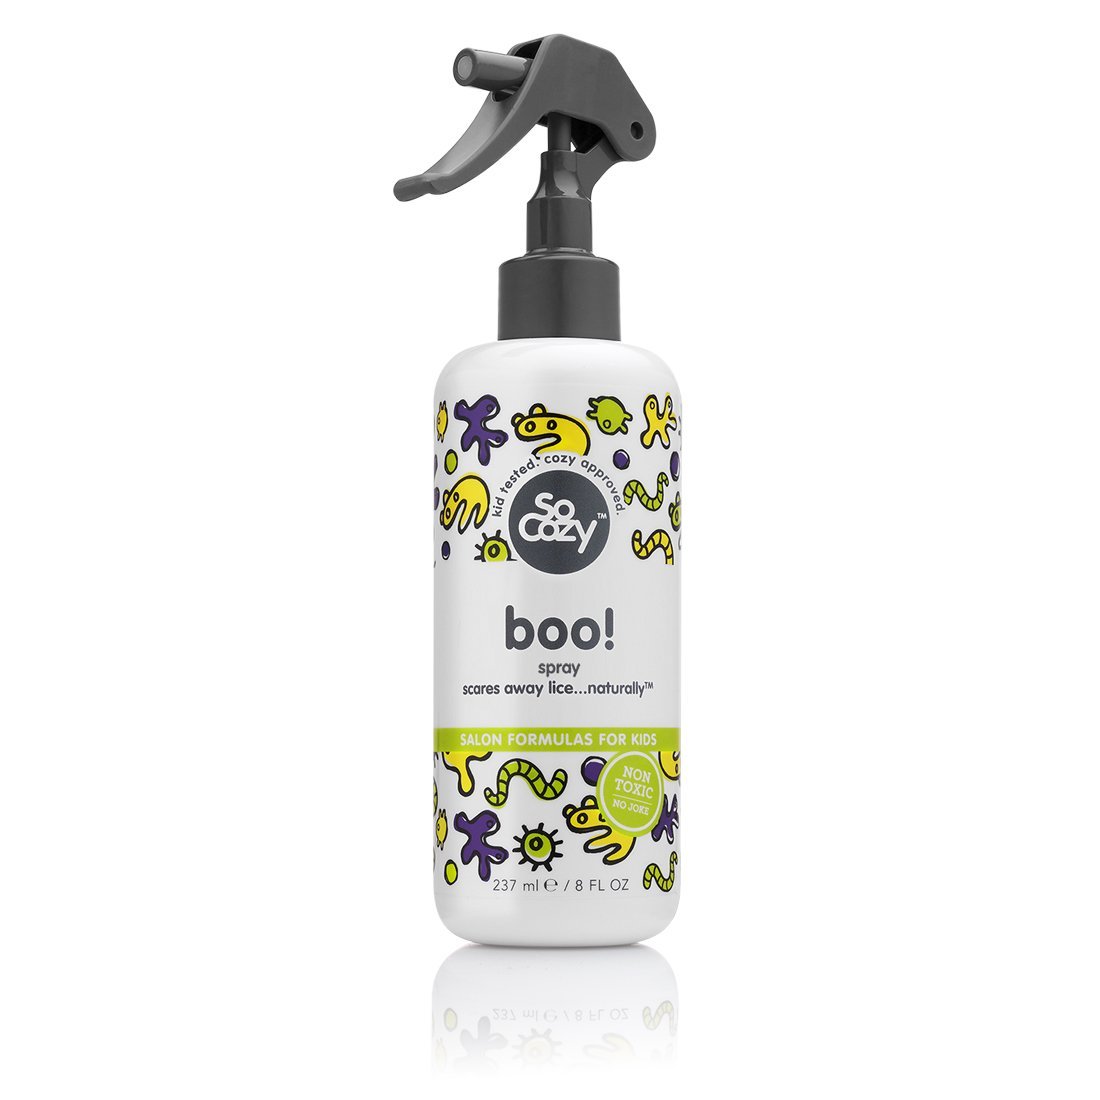 SoCozy Boo! Lice Scaring Spray Scares Away Lice… Naturally – Just $6.15!